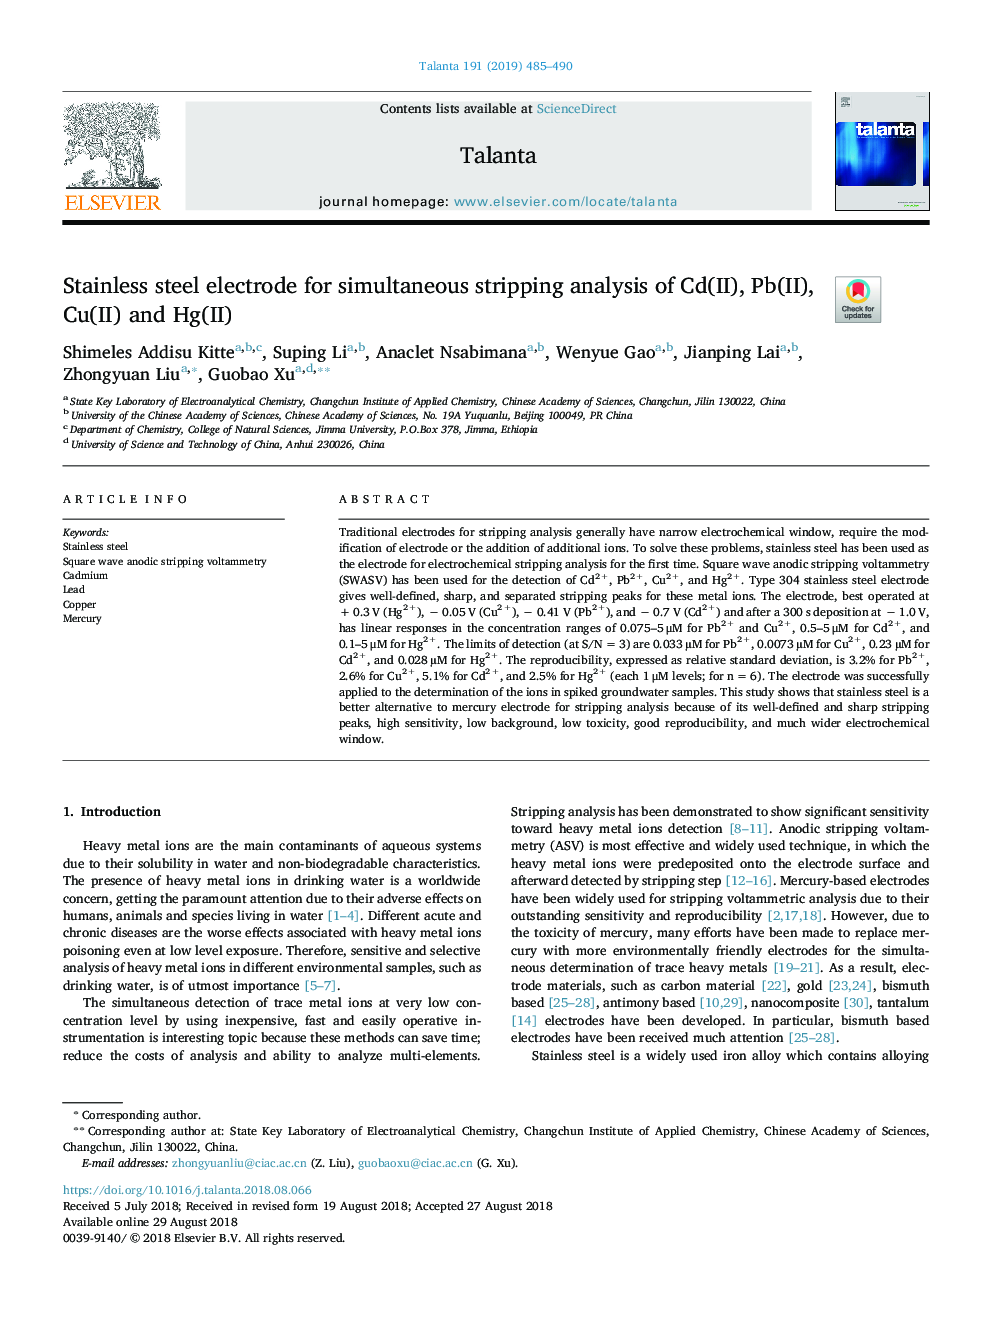 Stainless steel electrode for simultaneous stripping analysis of Cd(II), Pb(II), Cu(II) and Hg(II)